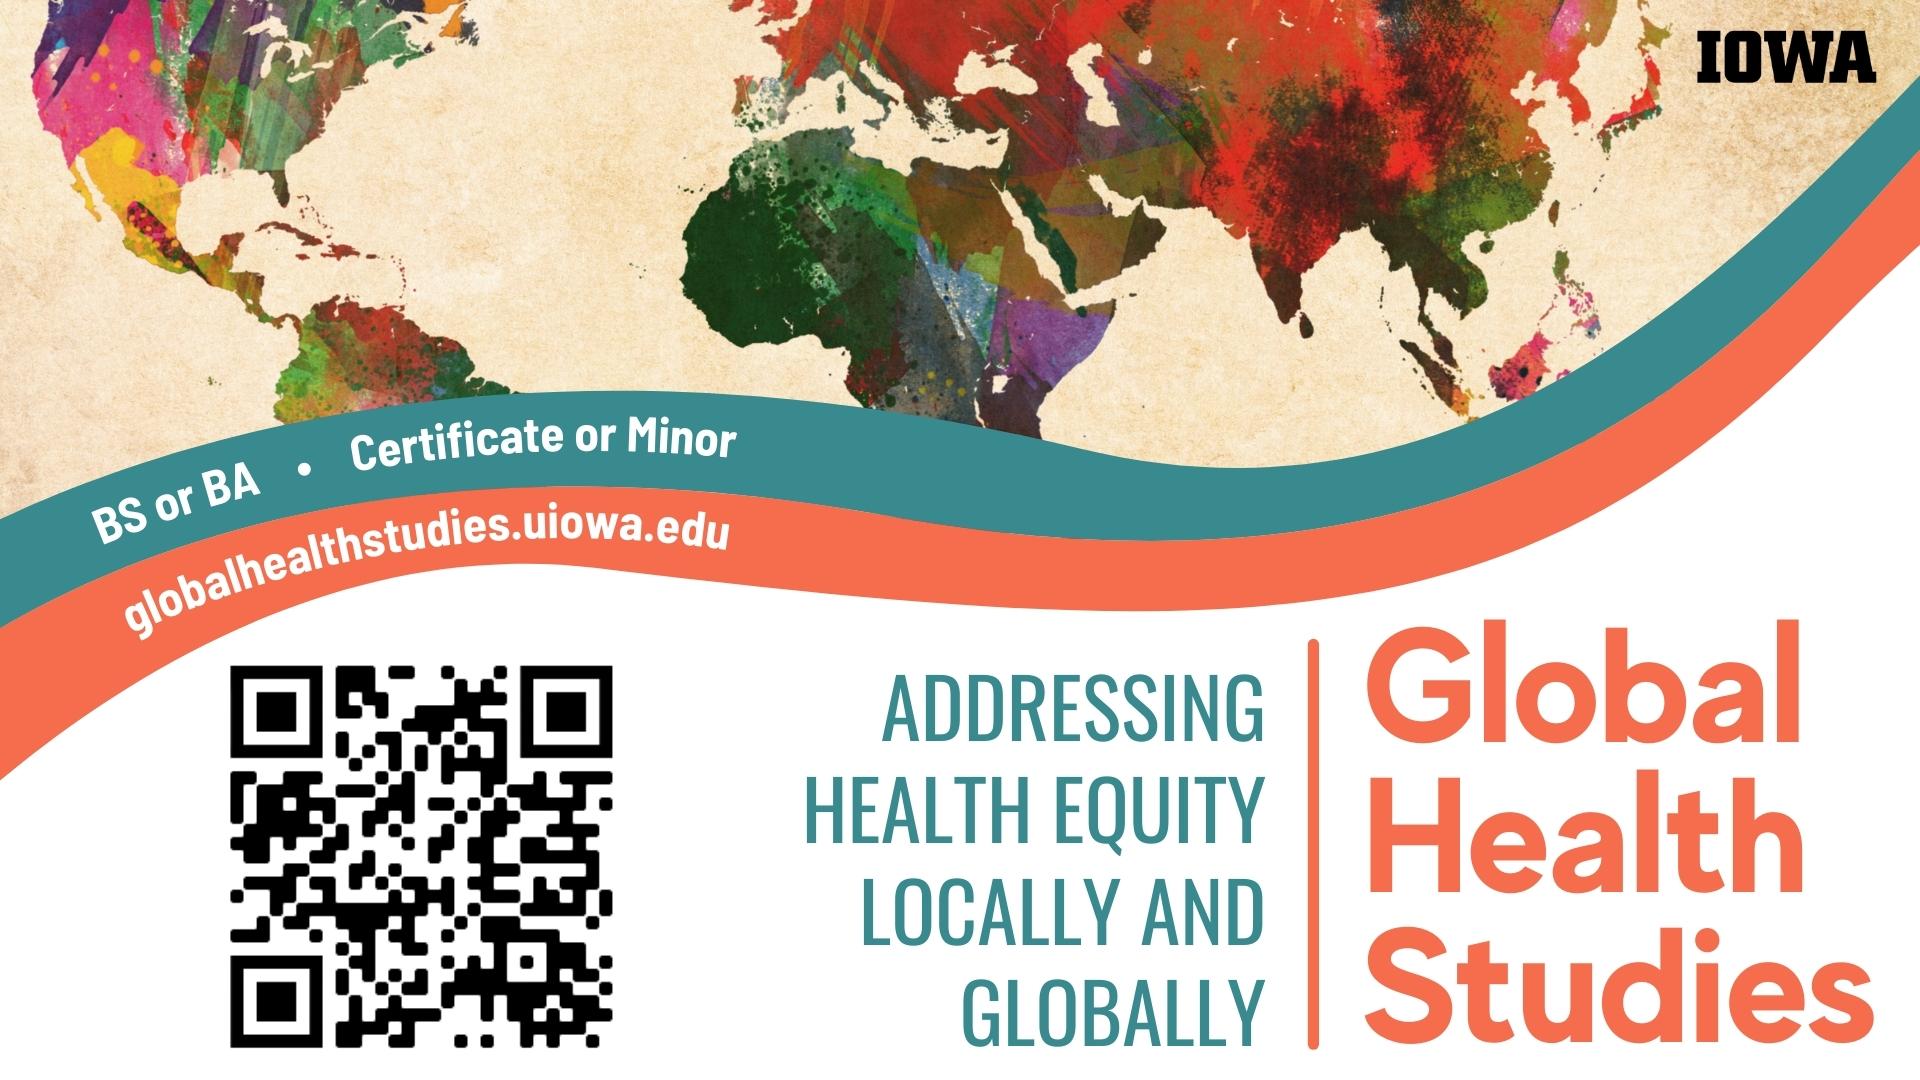 Global Health Studies | Addressing Health Equity locally and globally. BS or BA, Certificate or minor For more information go to globalhealthstudies.uiowa.edu